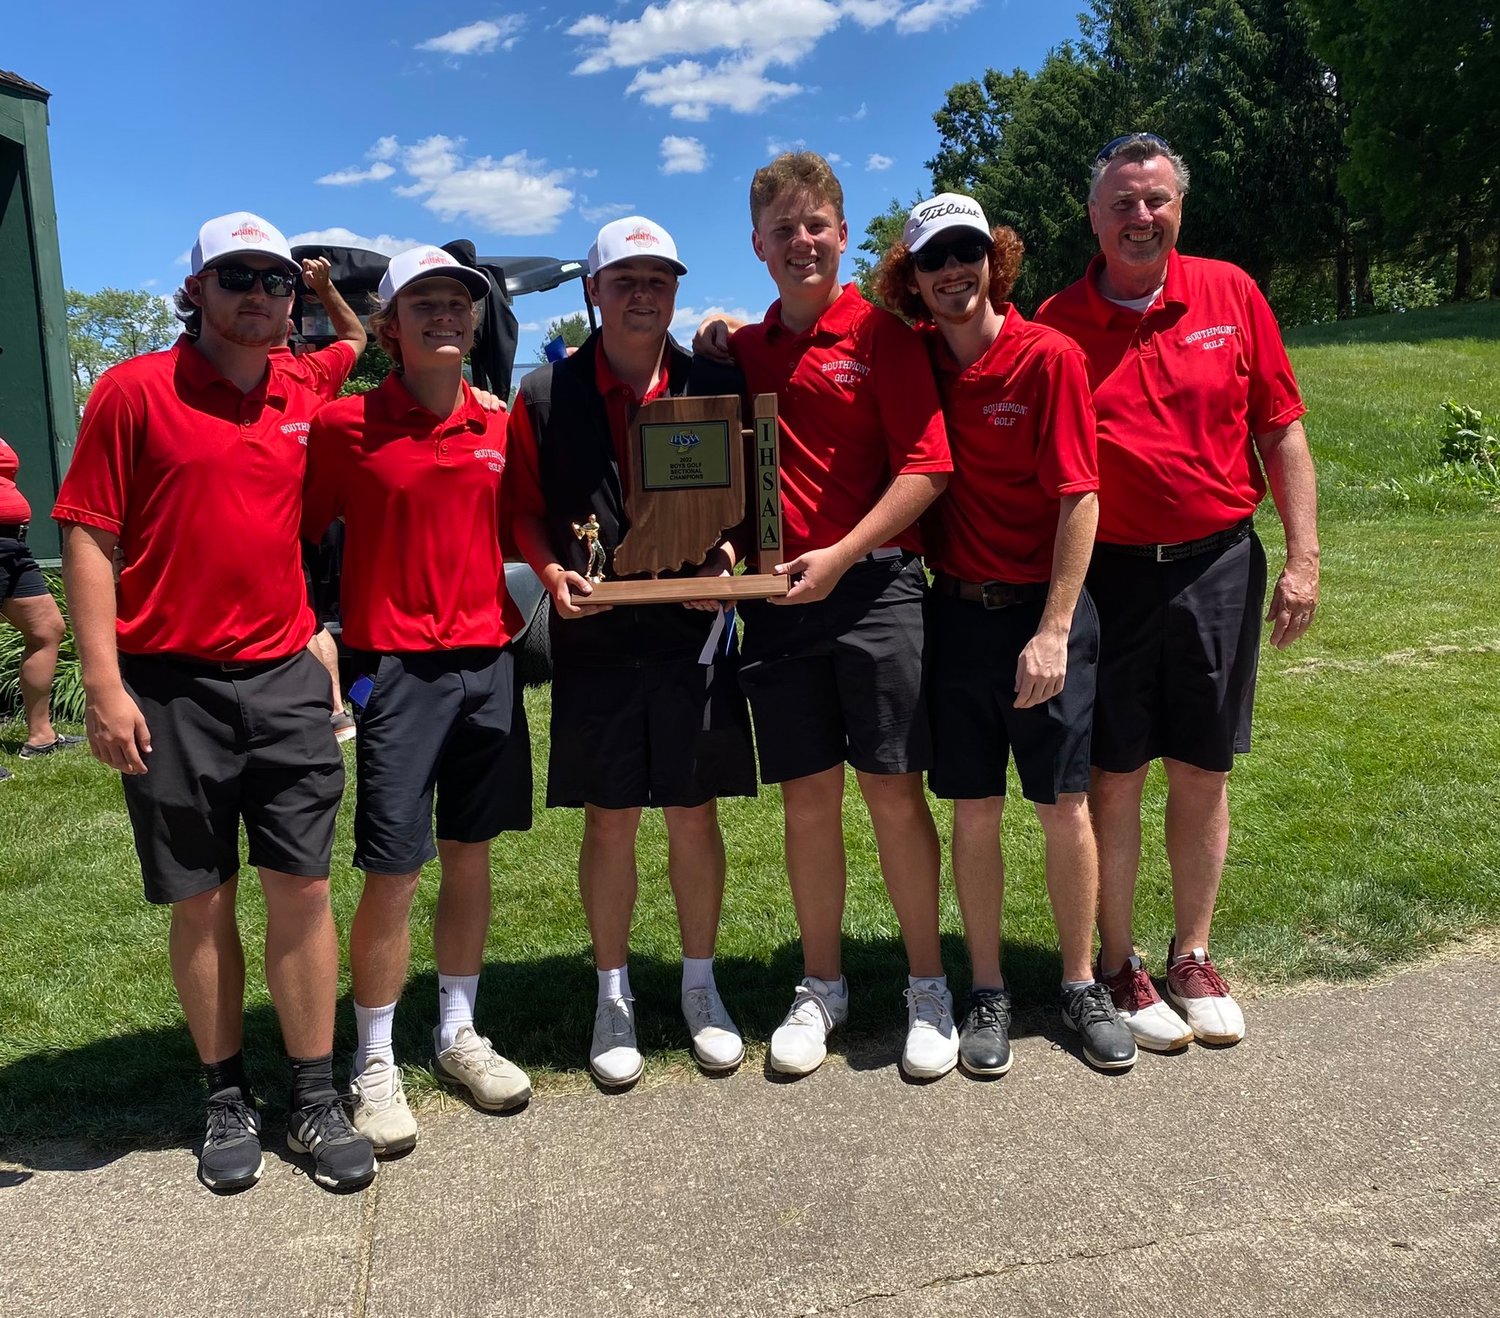 Southmont boys golf claimed their first sectional title since 2001 on Friday by edging out Greencastle by a score of 345-346. The Mounties now advance to next week’s Regional at Country Oaks Golf Course in Washington.